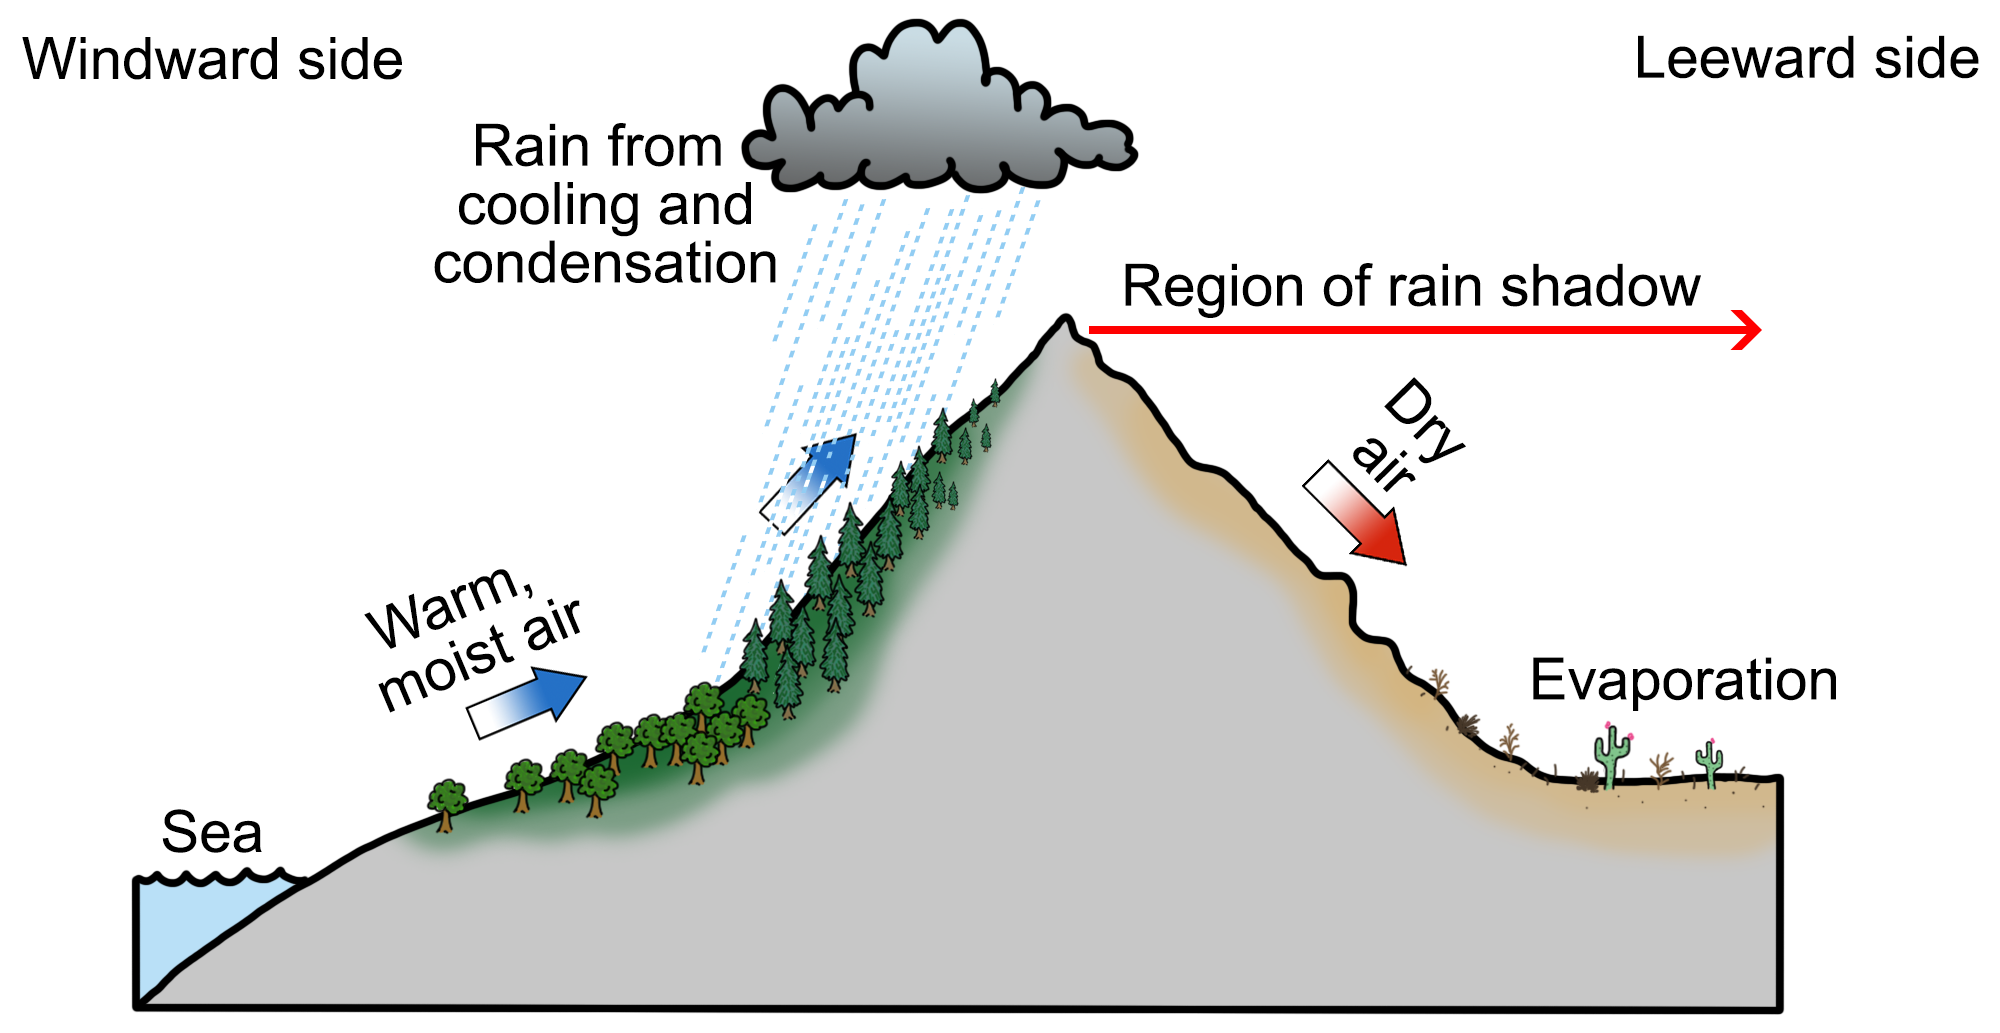 Diagram showing a rain shadow. The diagram is of a single, triangular mountain. To the left is a sea. As warm, moist air travels up the mountain from the see, it condense and cools, forming rain. On the opposite side of the mountain is the rain shadow. Dry air condenses and warms, and evaporation occurs at the foot of the leeward side of the mountain. Thus, the leeward side of the mountain is dry.